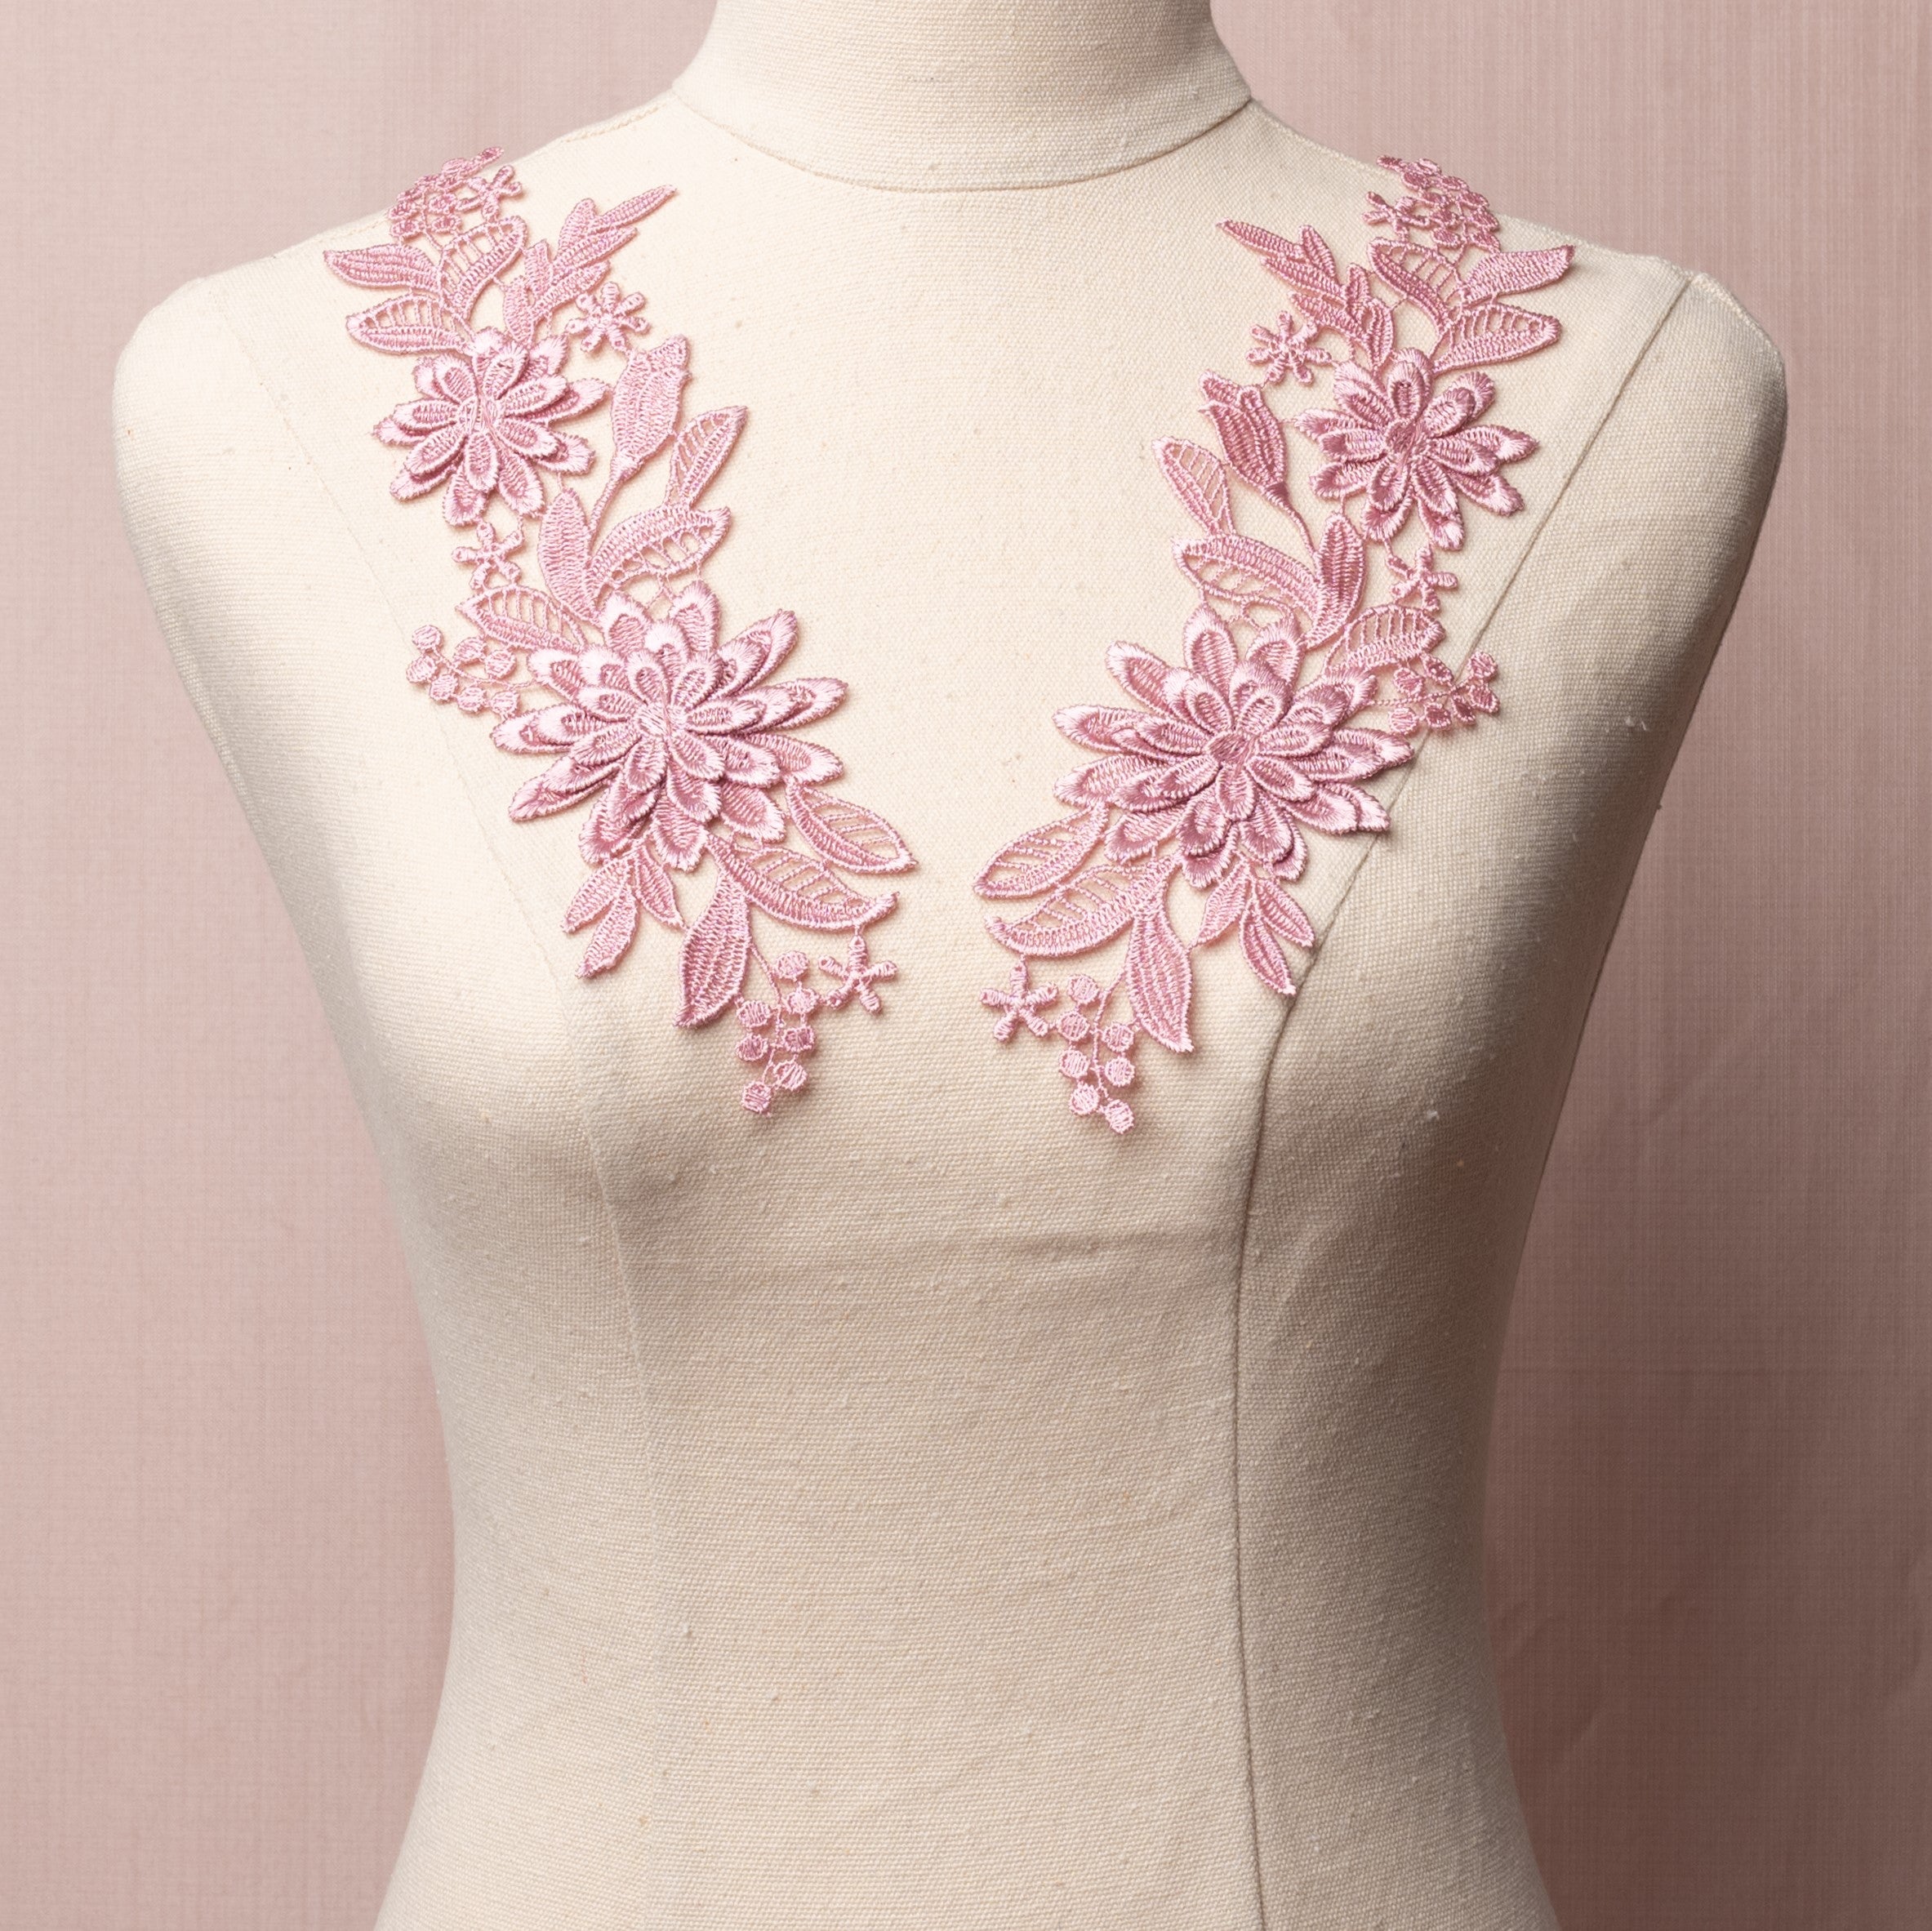 Embroidered dusty pink 3D lace applique pair with a floral design.  The larger flower shape has 3 layers of petals and the smaller flower shape has two layers of petals.  The appliques are displayed on a mannequin.